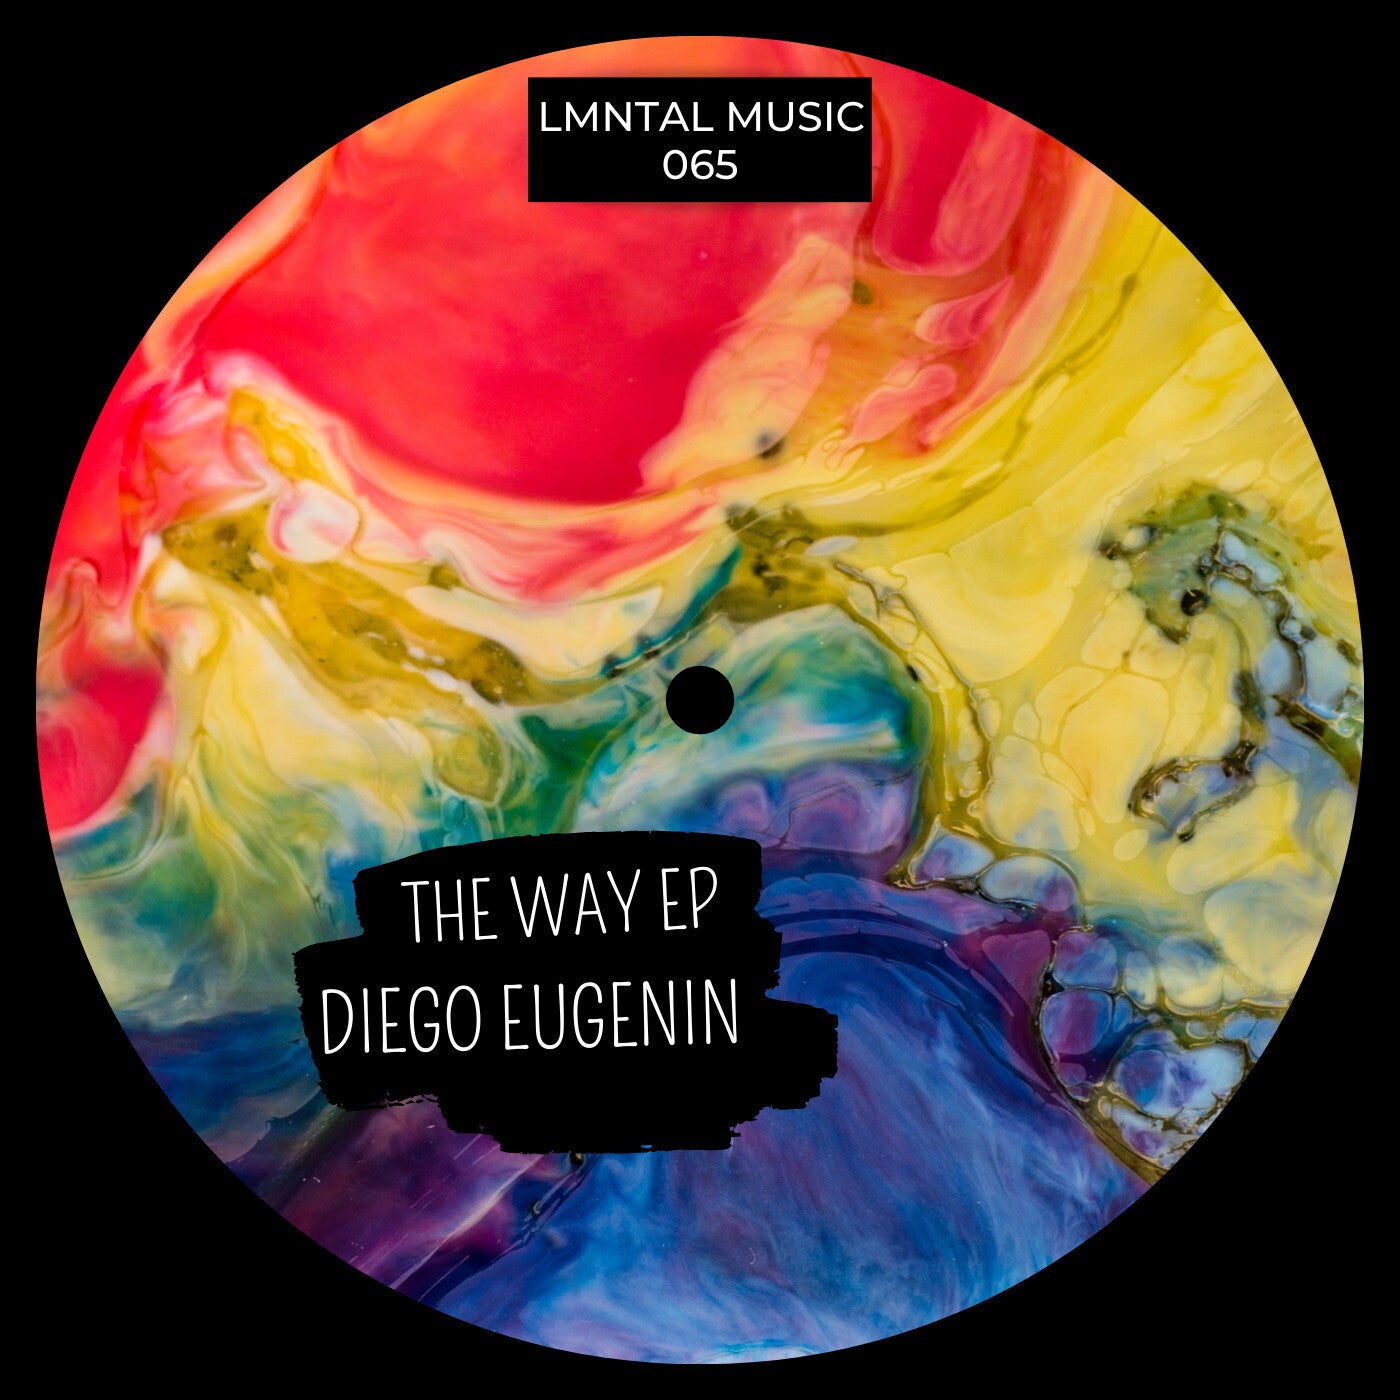 Diego Eugenin – THE WAY EP [LMT065]